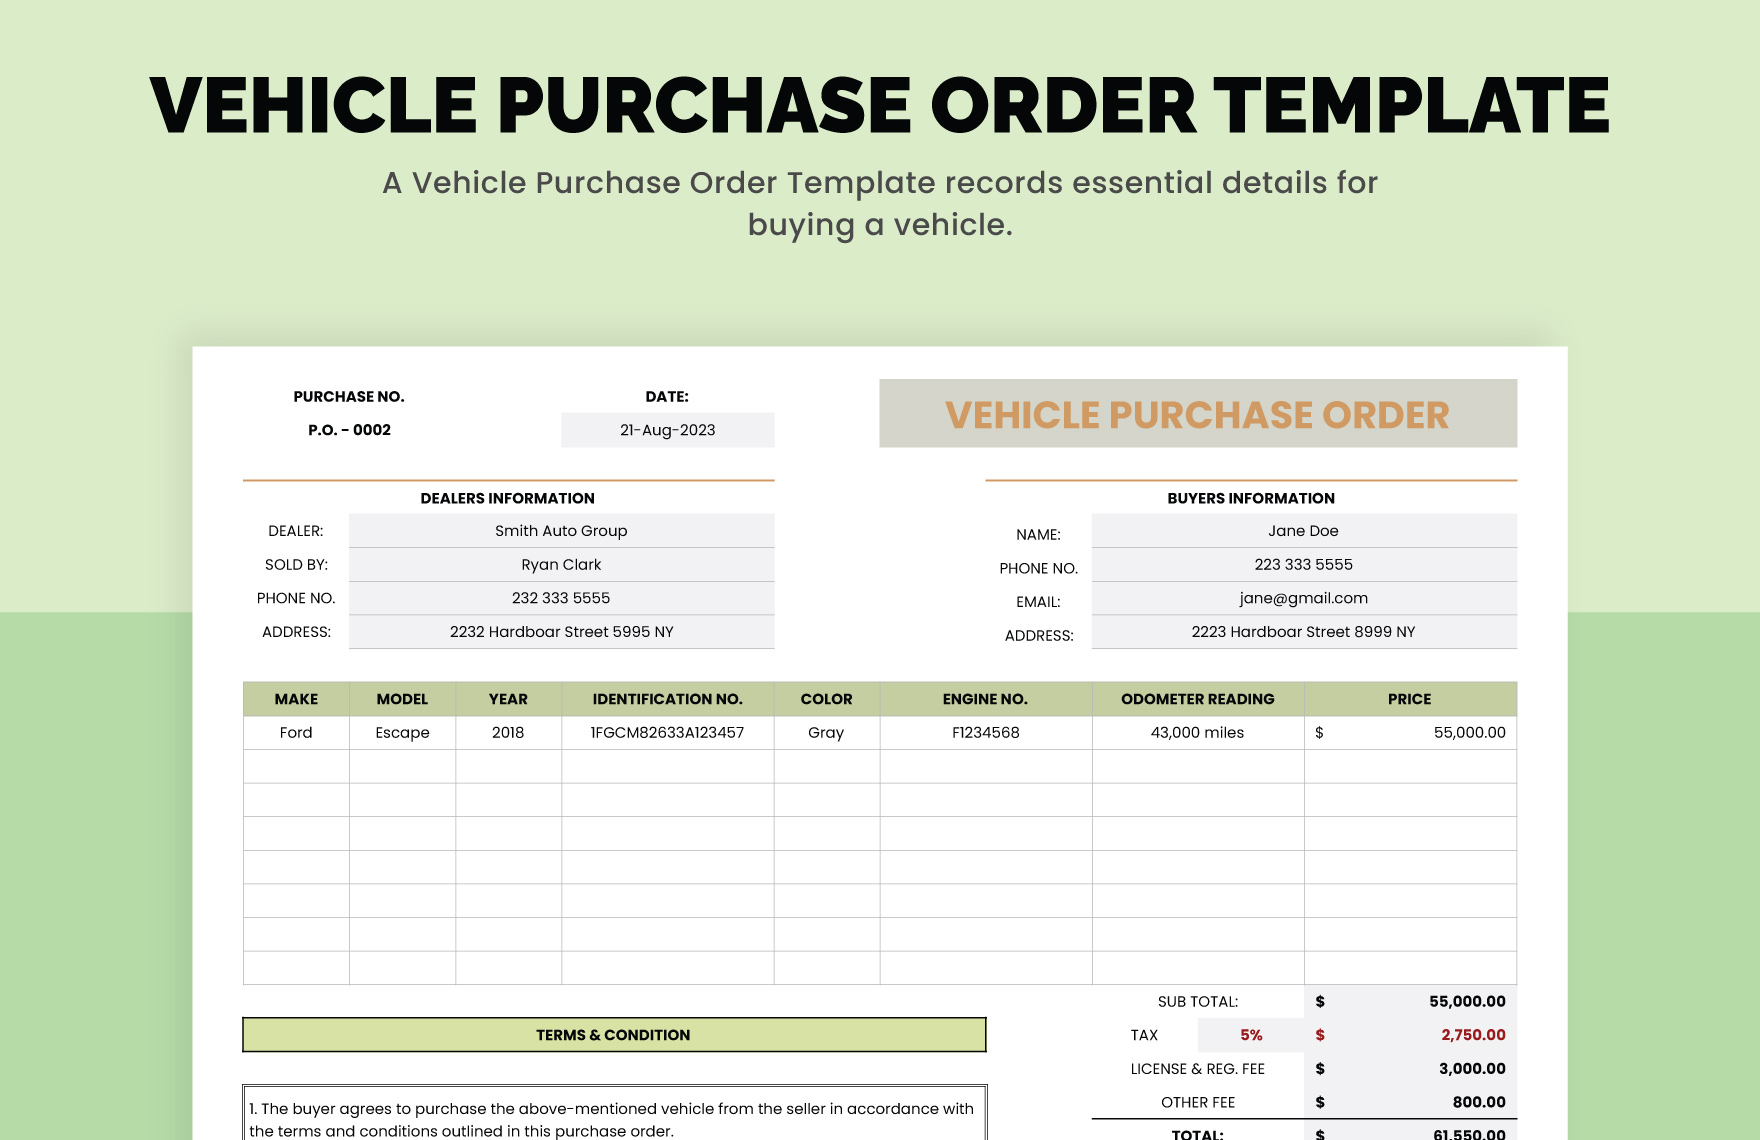 Vehicle Purchase Order Template - Download in Excel, Google Sheets ...